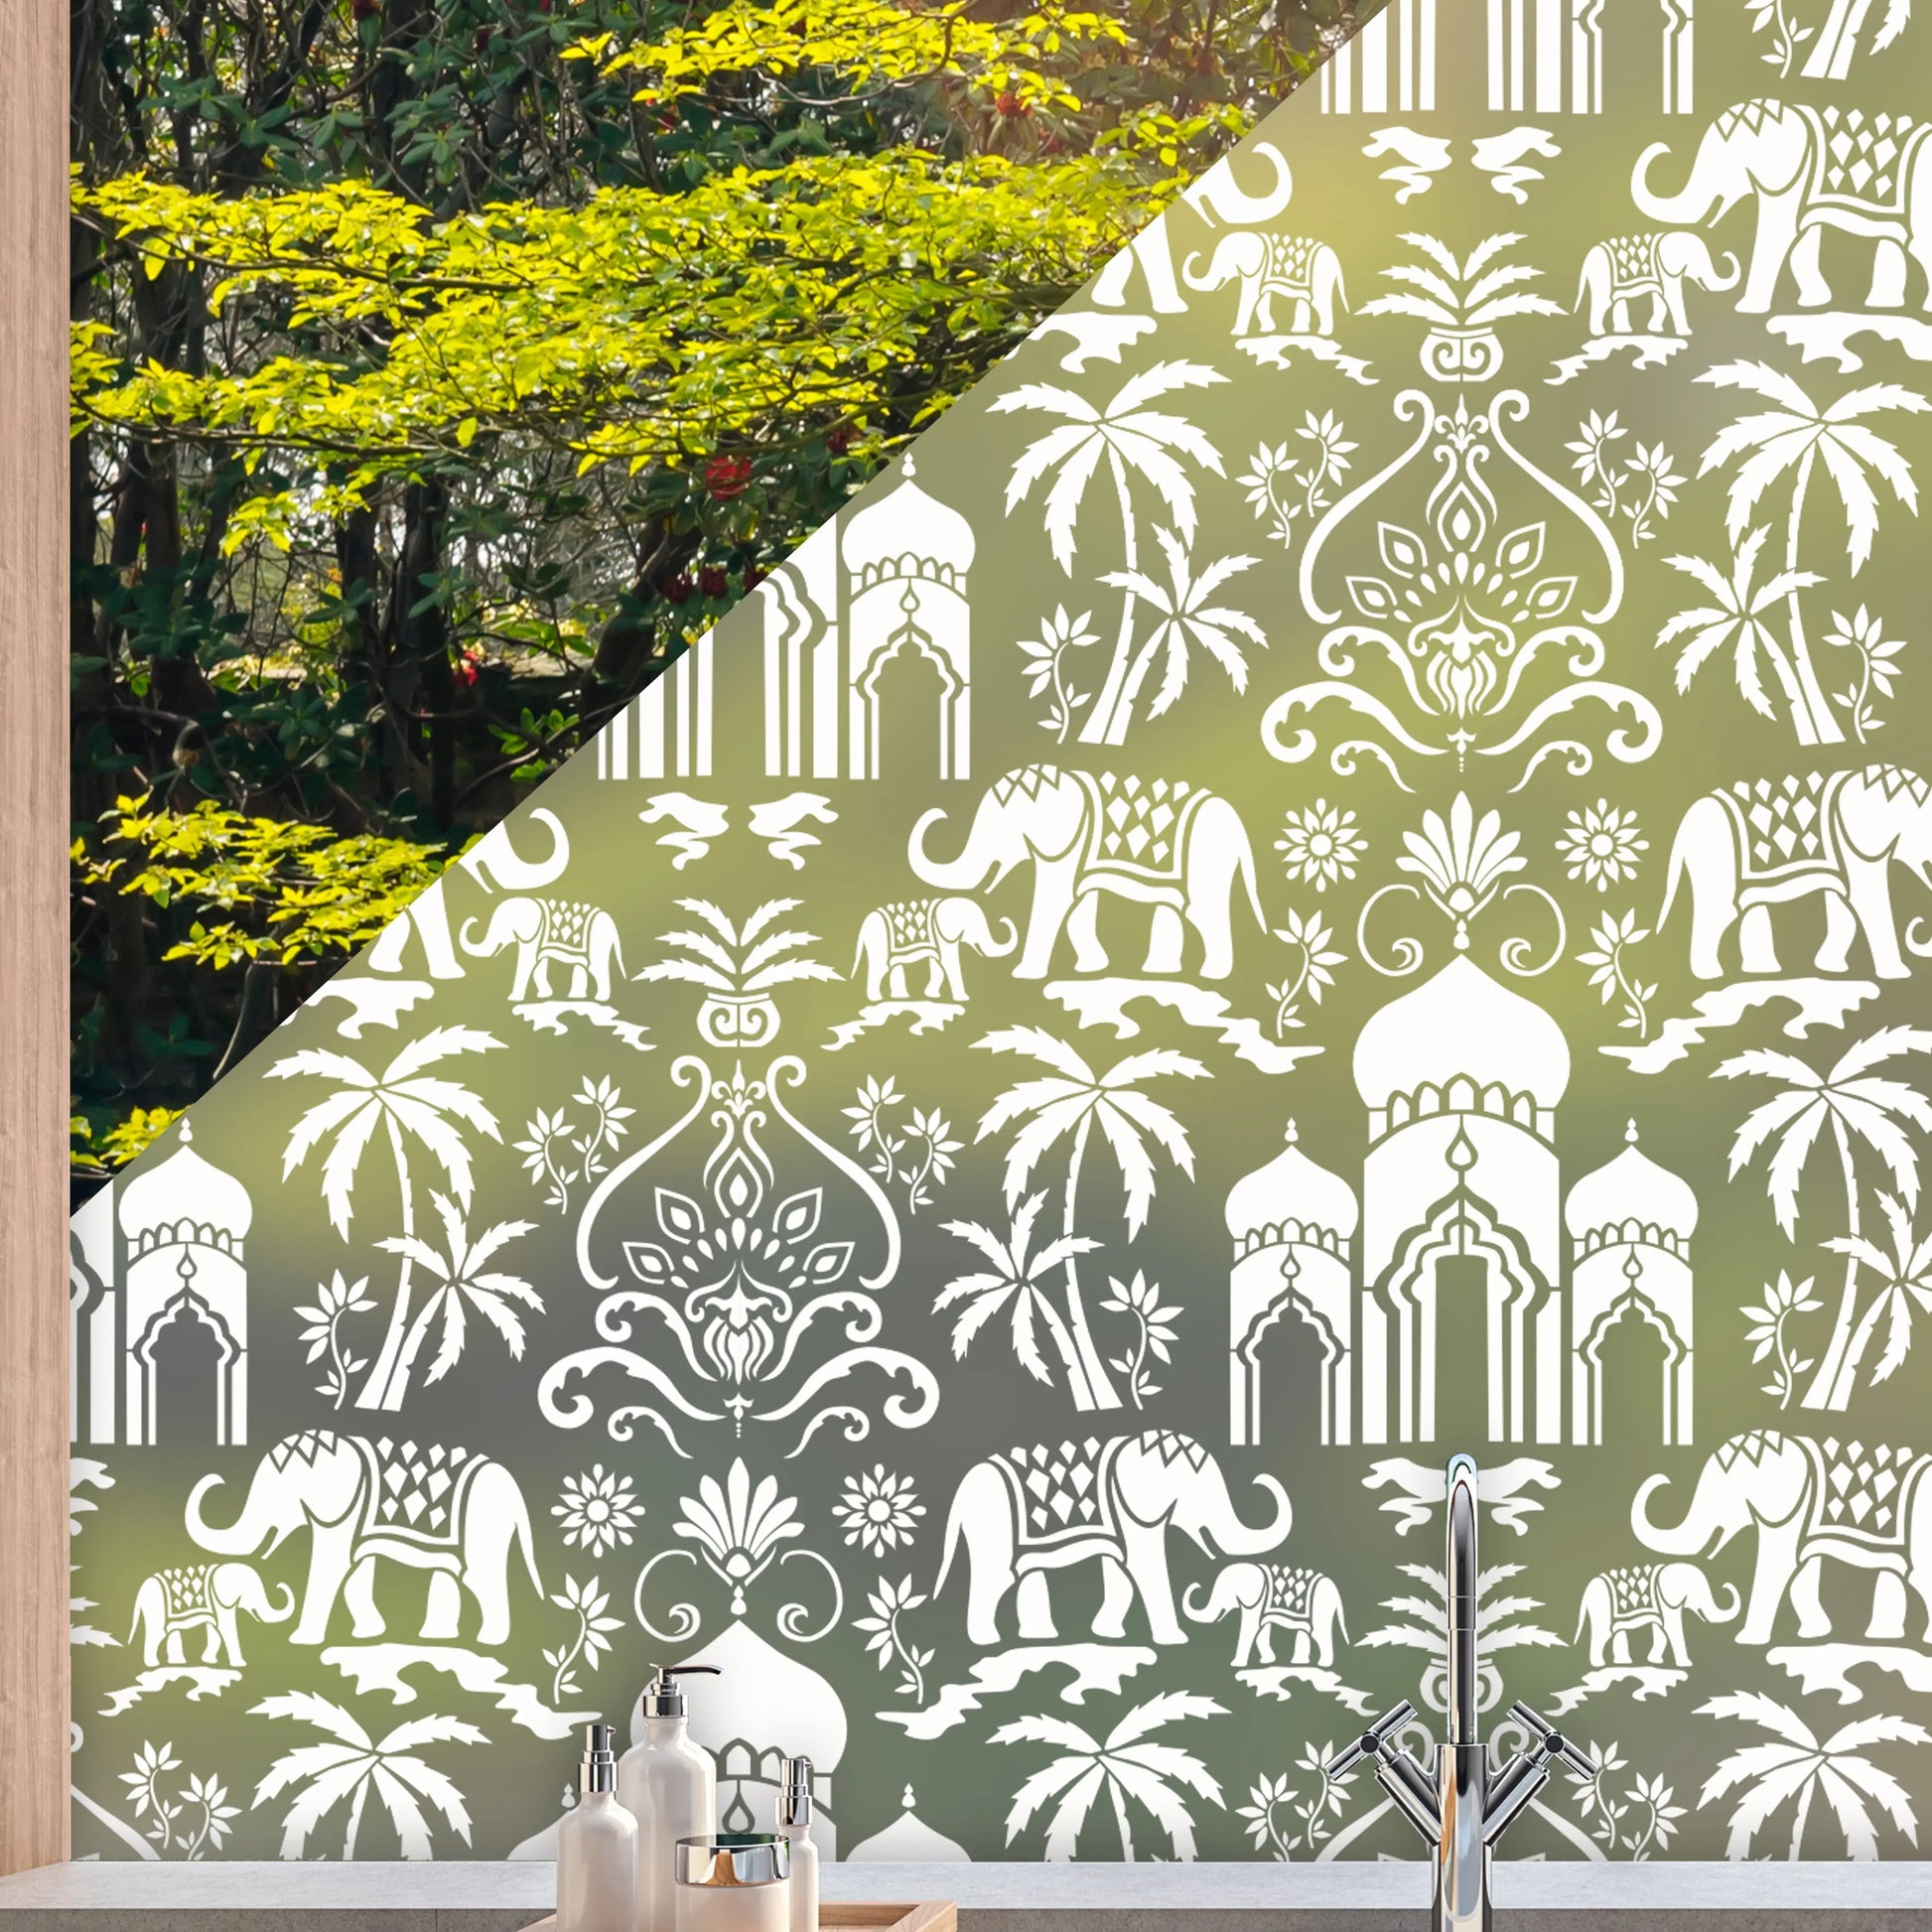 Privacy Window Mumbai Frosted Window Privacy Panel Dizzy Duck Designs